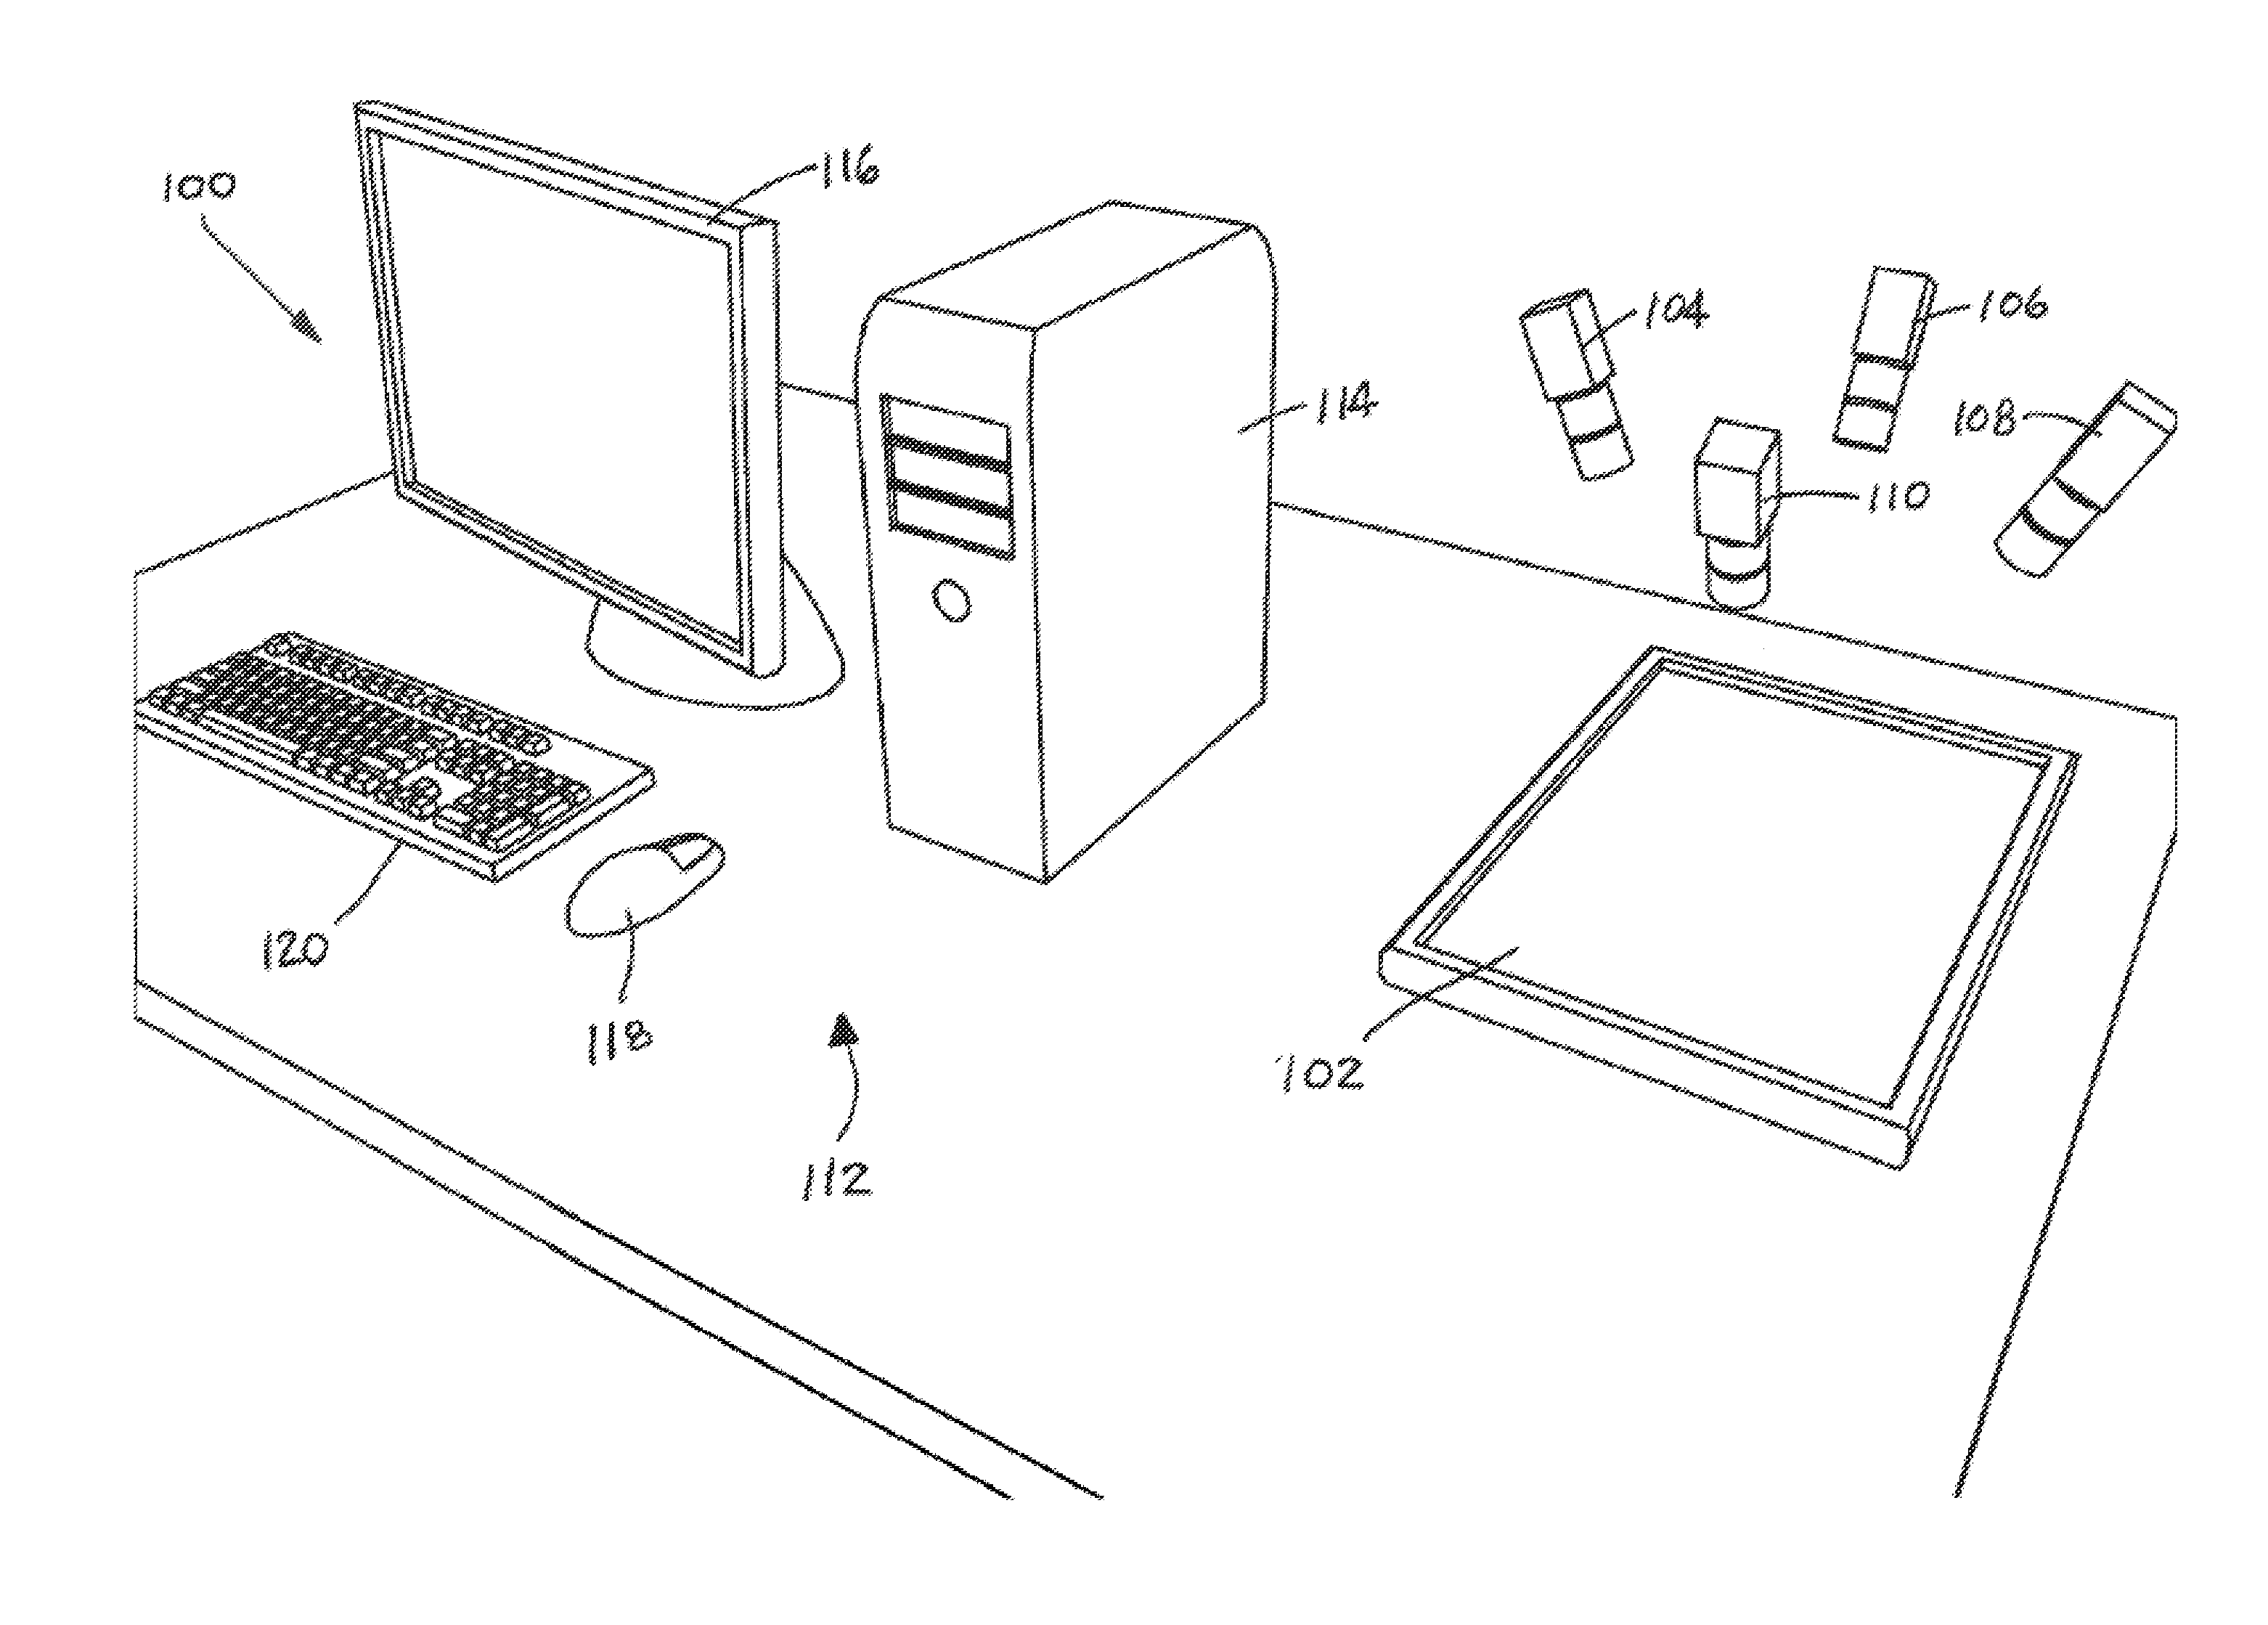 Method and apparatus for 3D imaging a workpiece